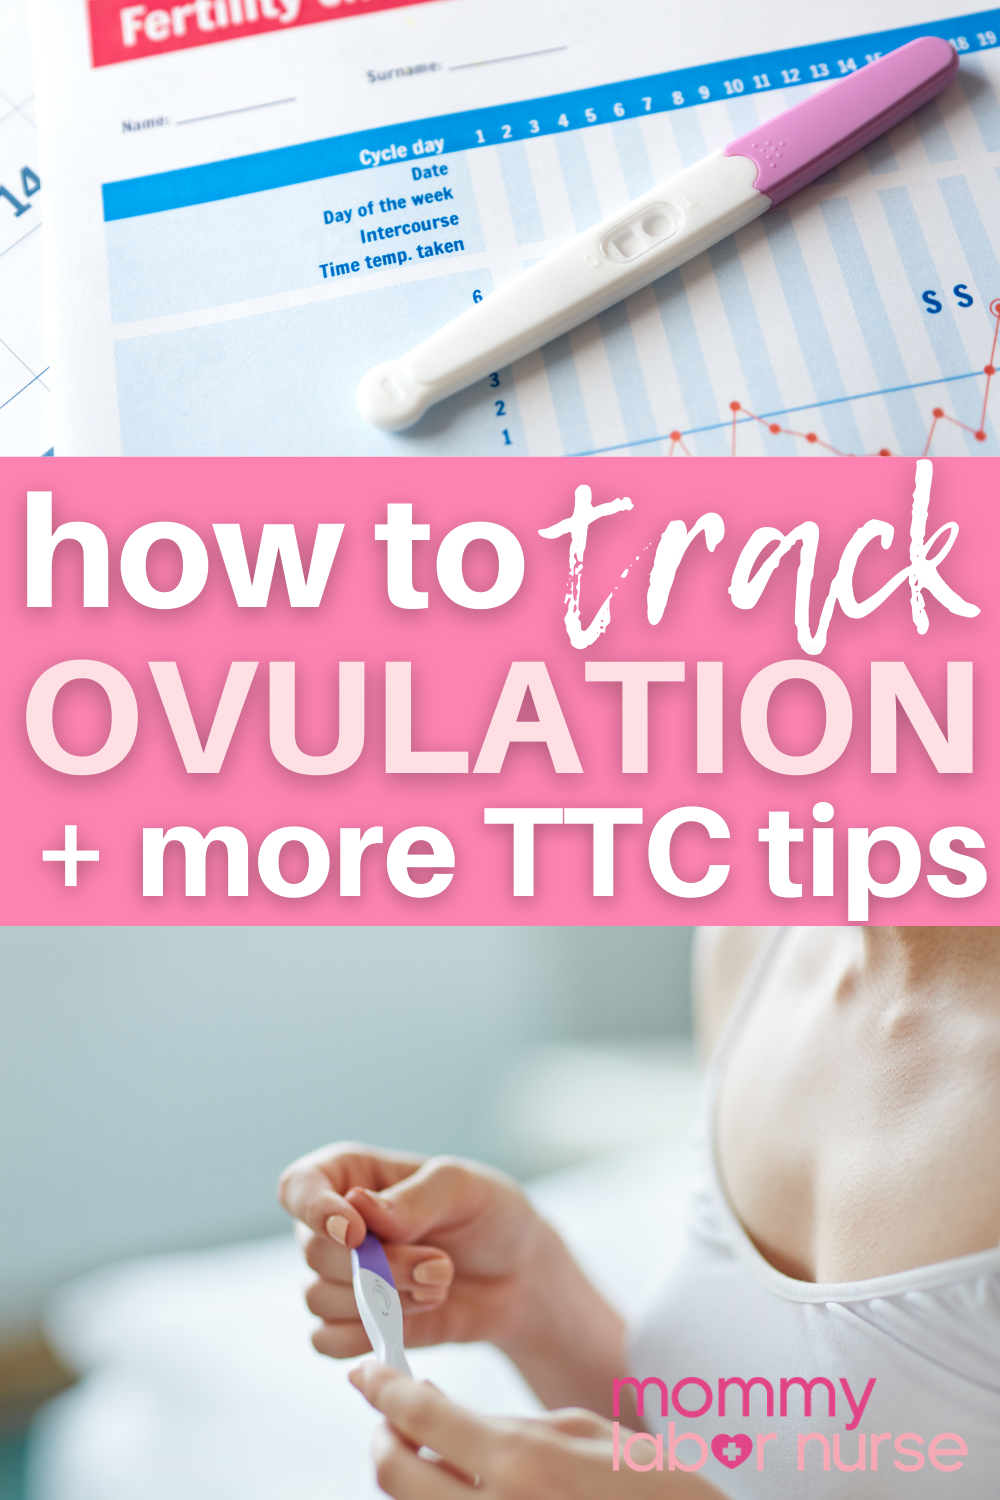 how to track ovulation, ways to track ovulation, TTC tips